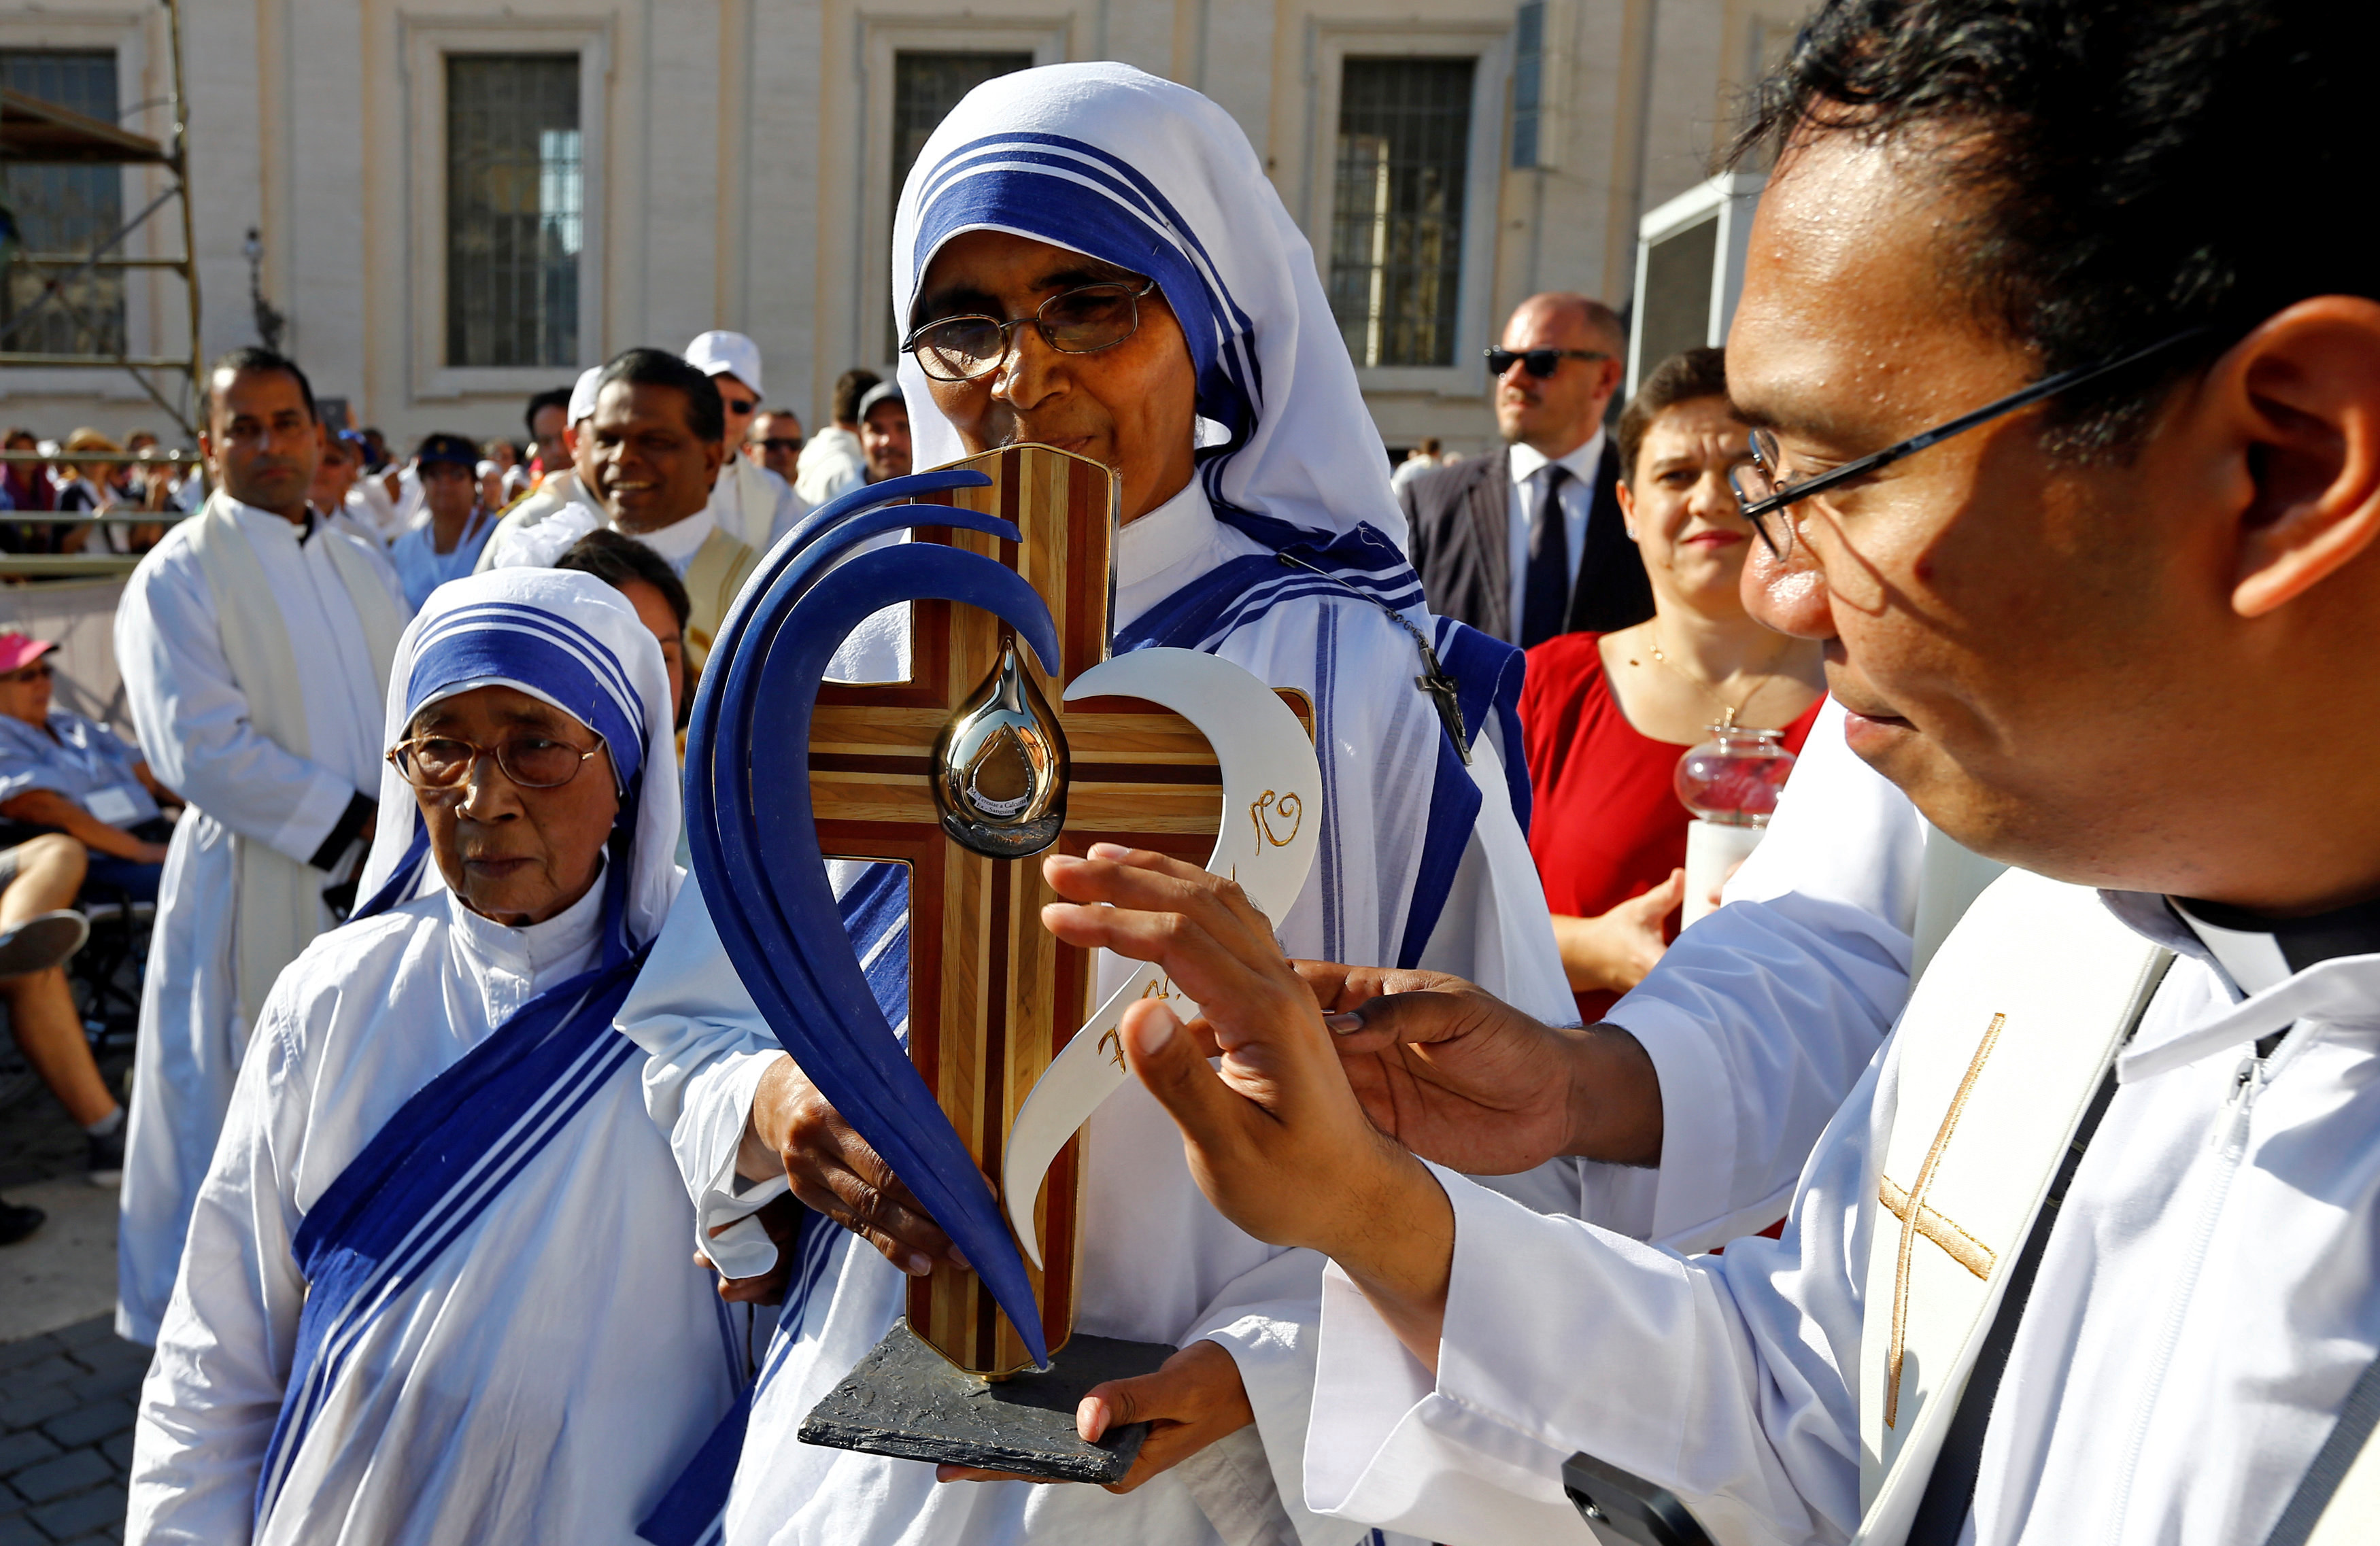 A Missionaries of Charity nun carries a relic of St. Teresa of Kolkata before Pope Francis celebrates her canonization Mass in St. Peter's Square at the Vatican Sept. 4. (CNS photo/Stefano Rellandini, Reuters)